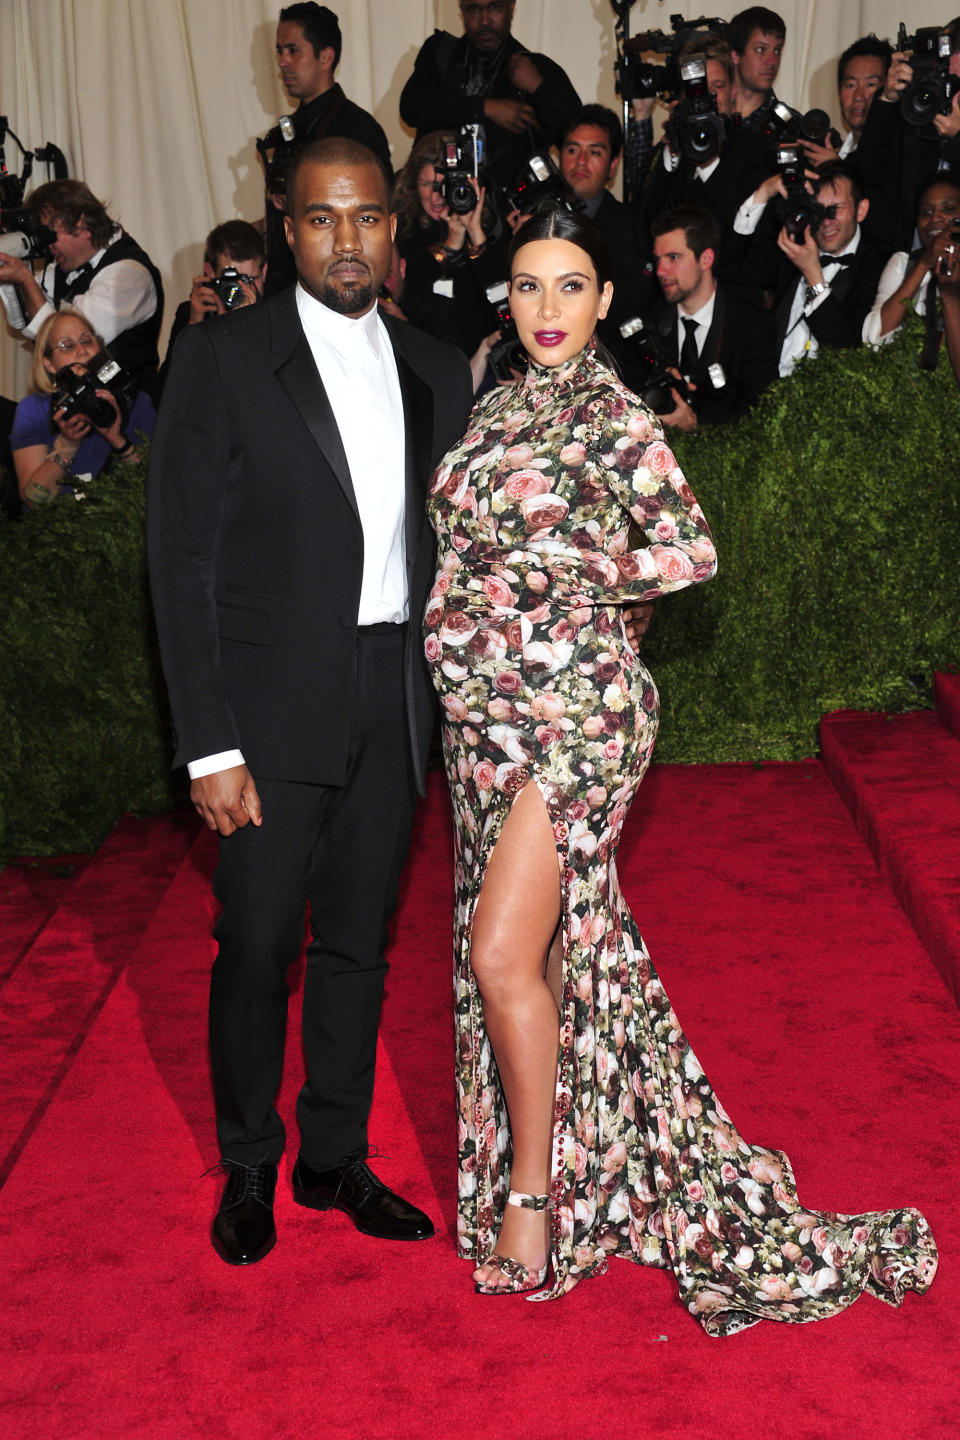 Kanye West and Kim Kardashian attends The Metropolitan Museum of Art's Costume Institute benefit celebrating "PUNK: Chaos to Couture" on Monday May 6, 2013 in New York. (Photo by Charles Sykes/Invision/AP)